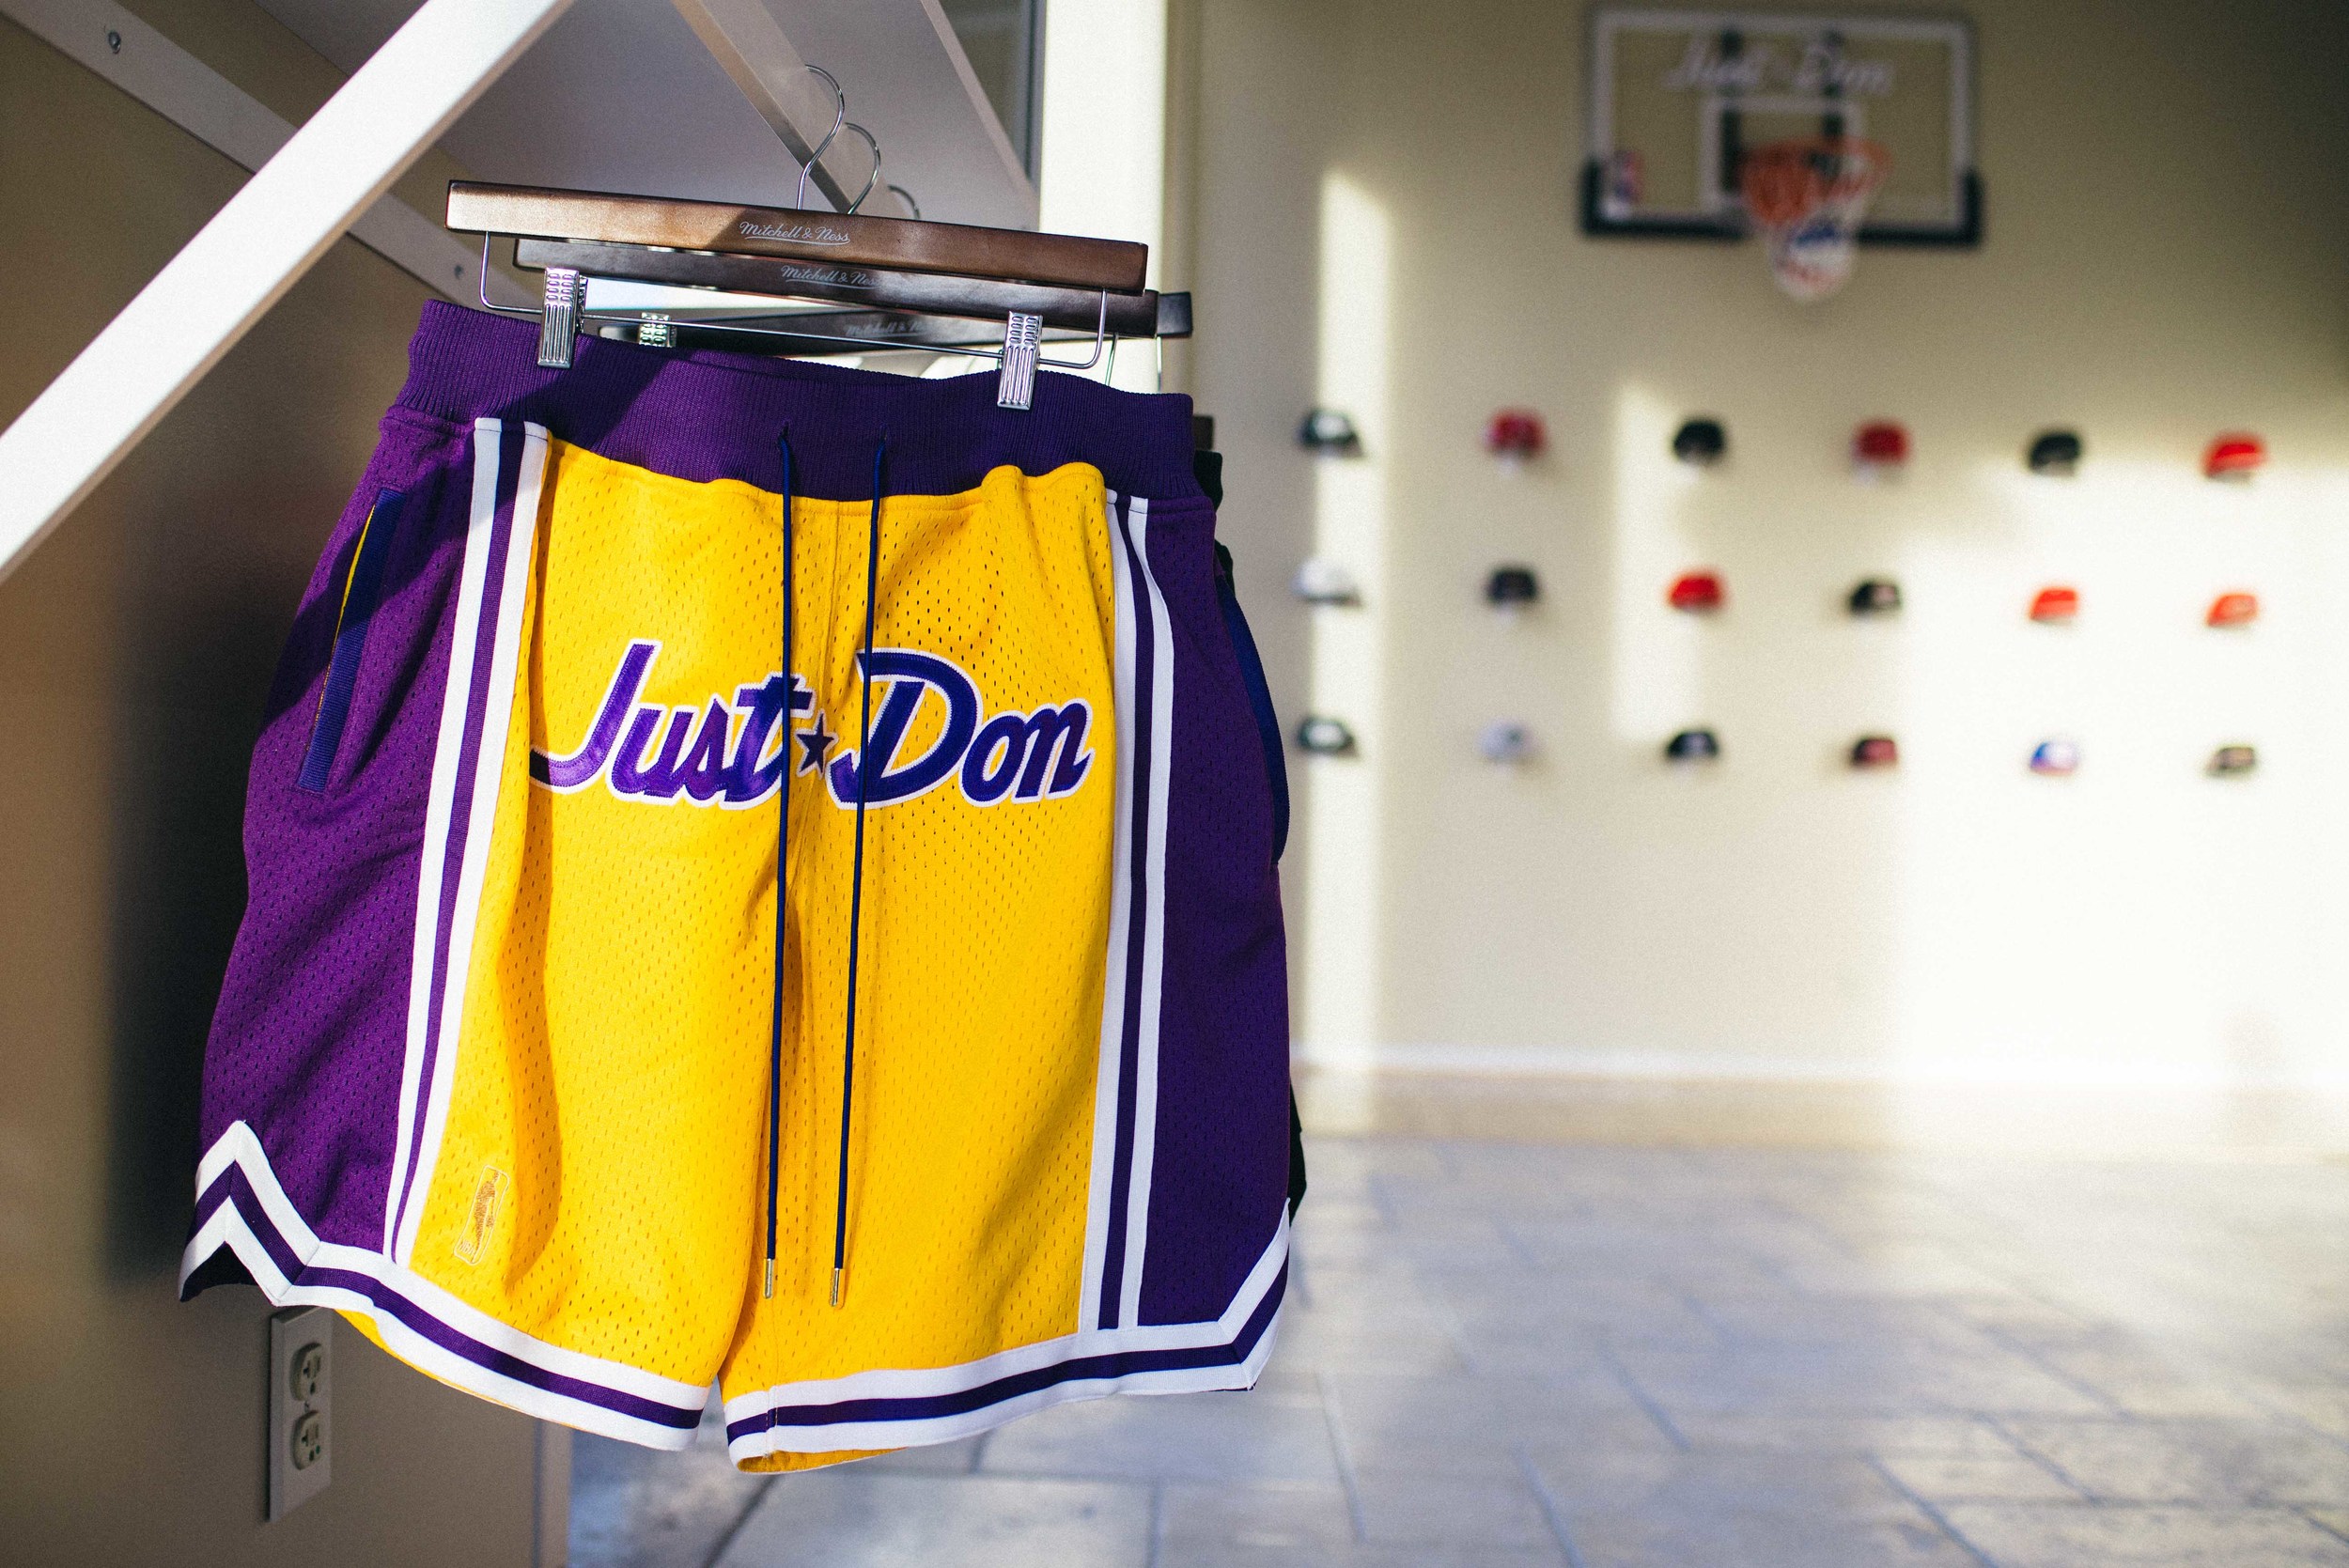  The Just Don® Pop-Up in Downtown Los Angeles. / Photo: © Diane Abapo, SUSPEND Magazine. 